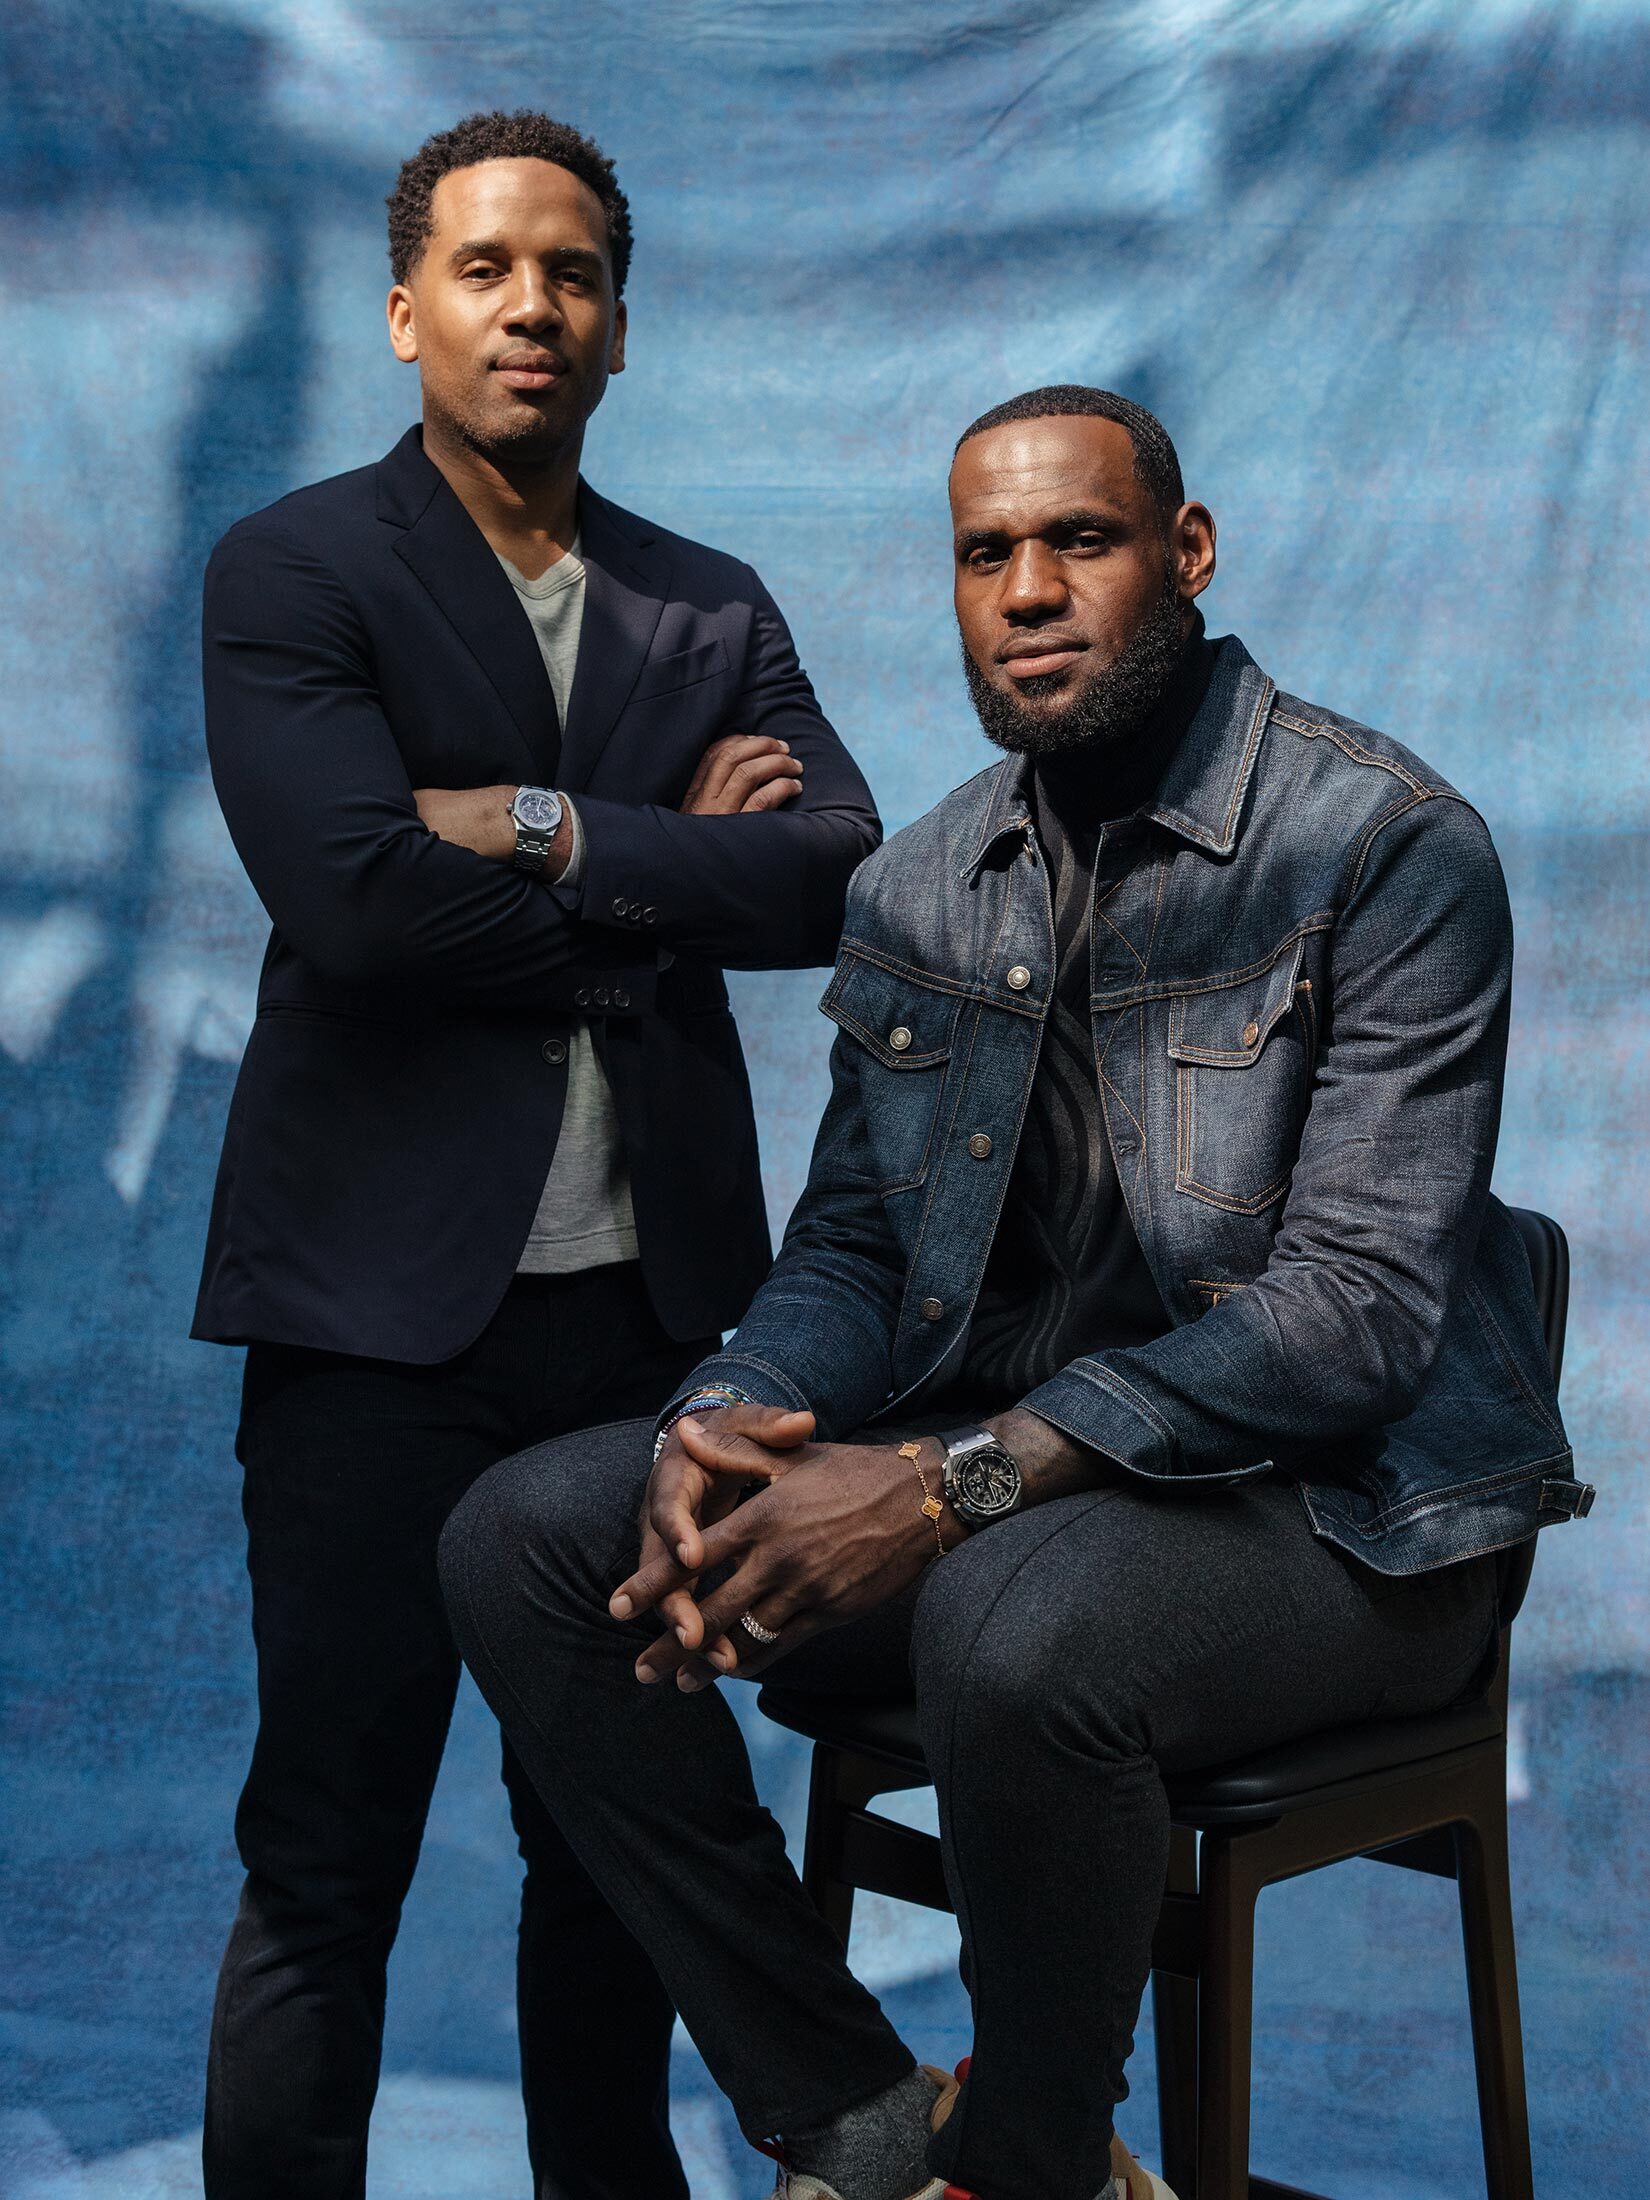 Disney + and Lebron James Are Teaming to Develop a Series